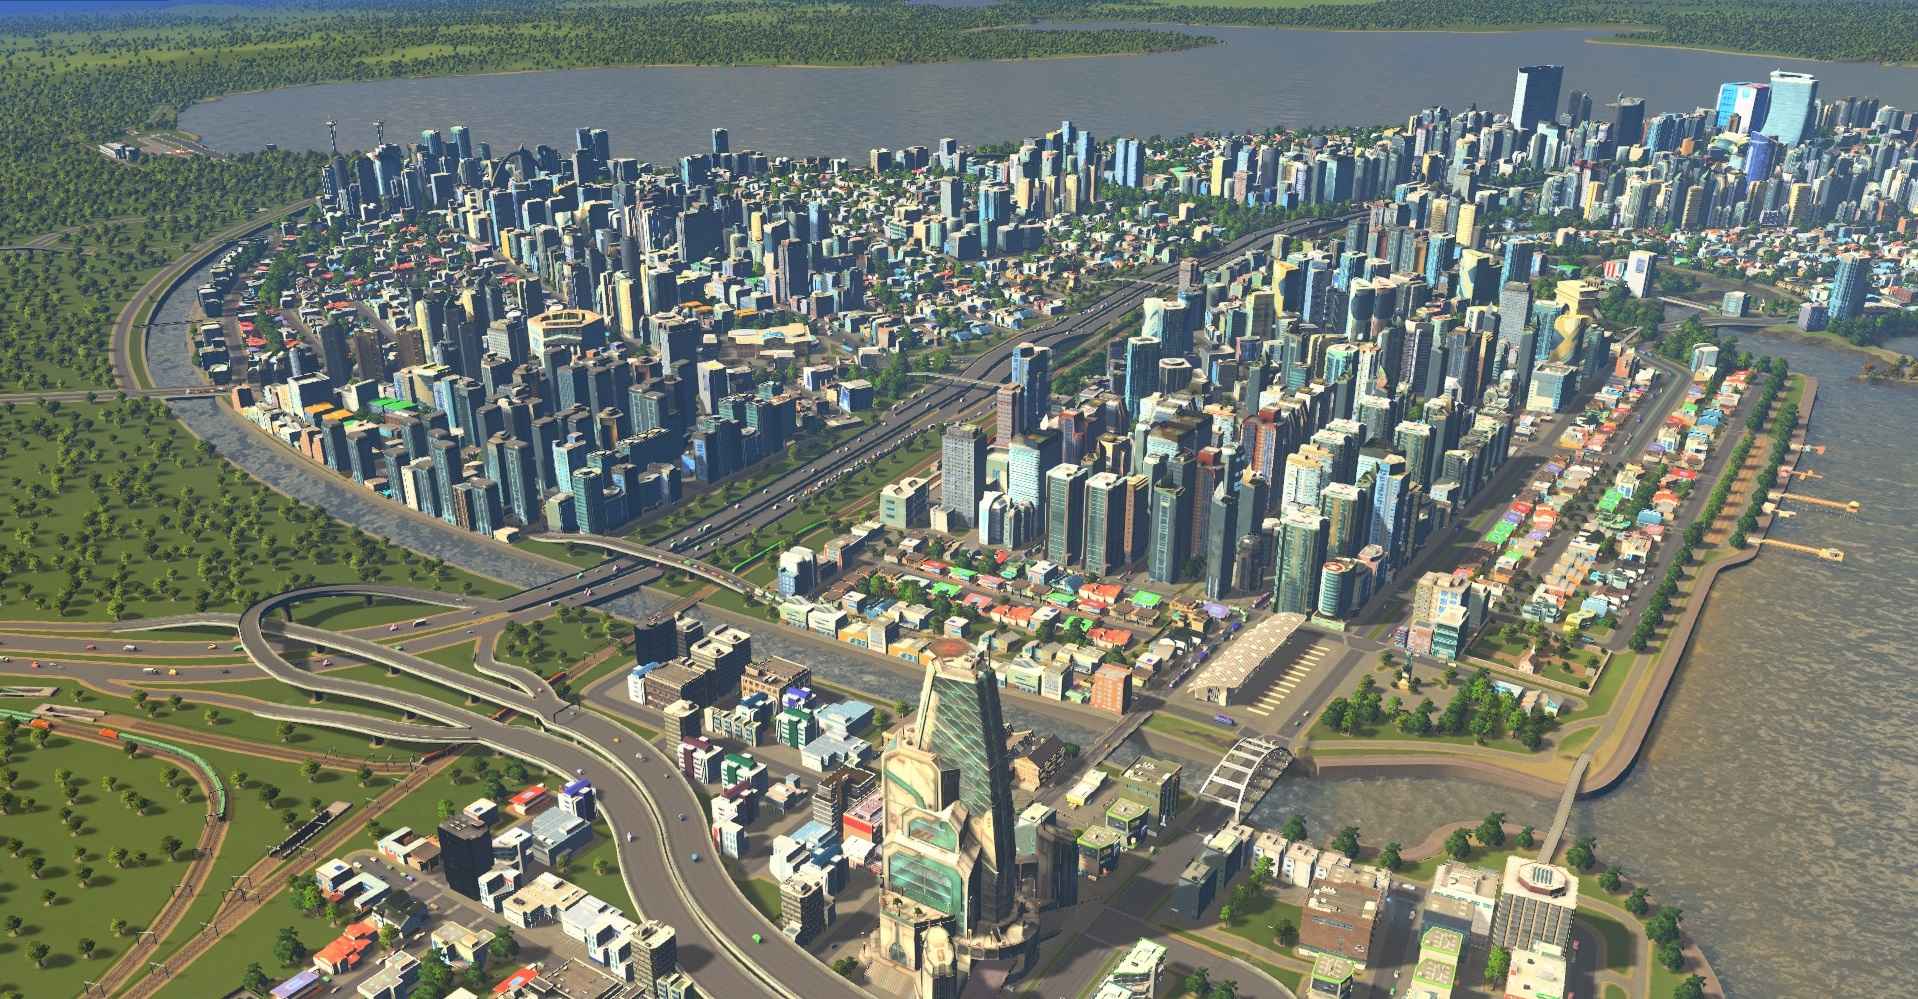 city skylines download pc